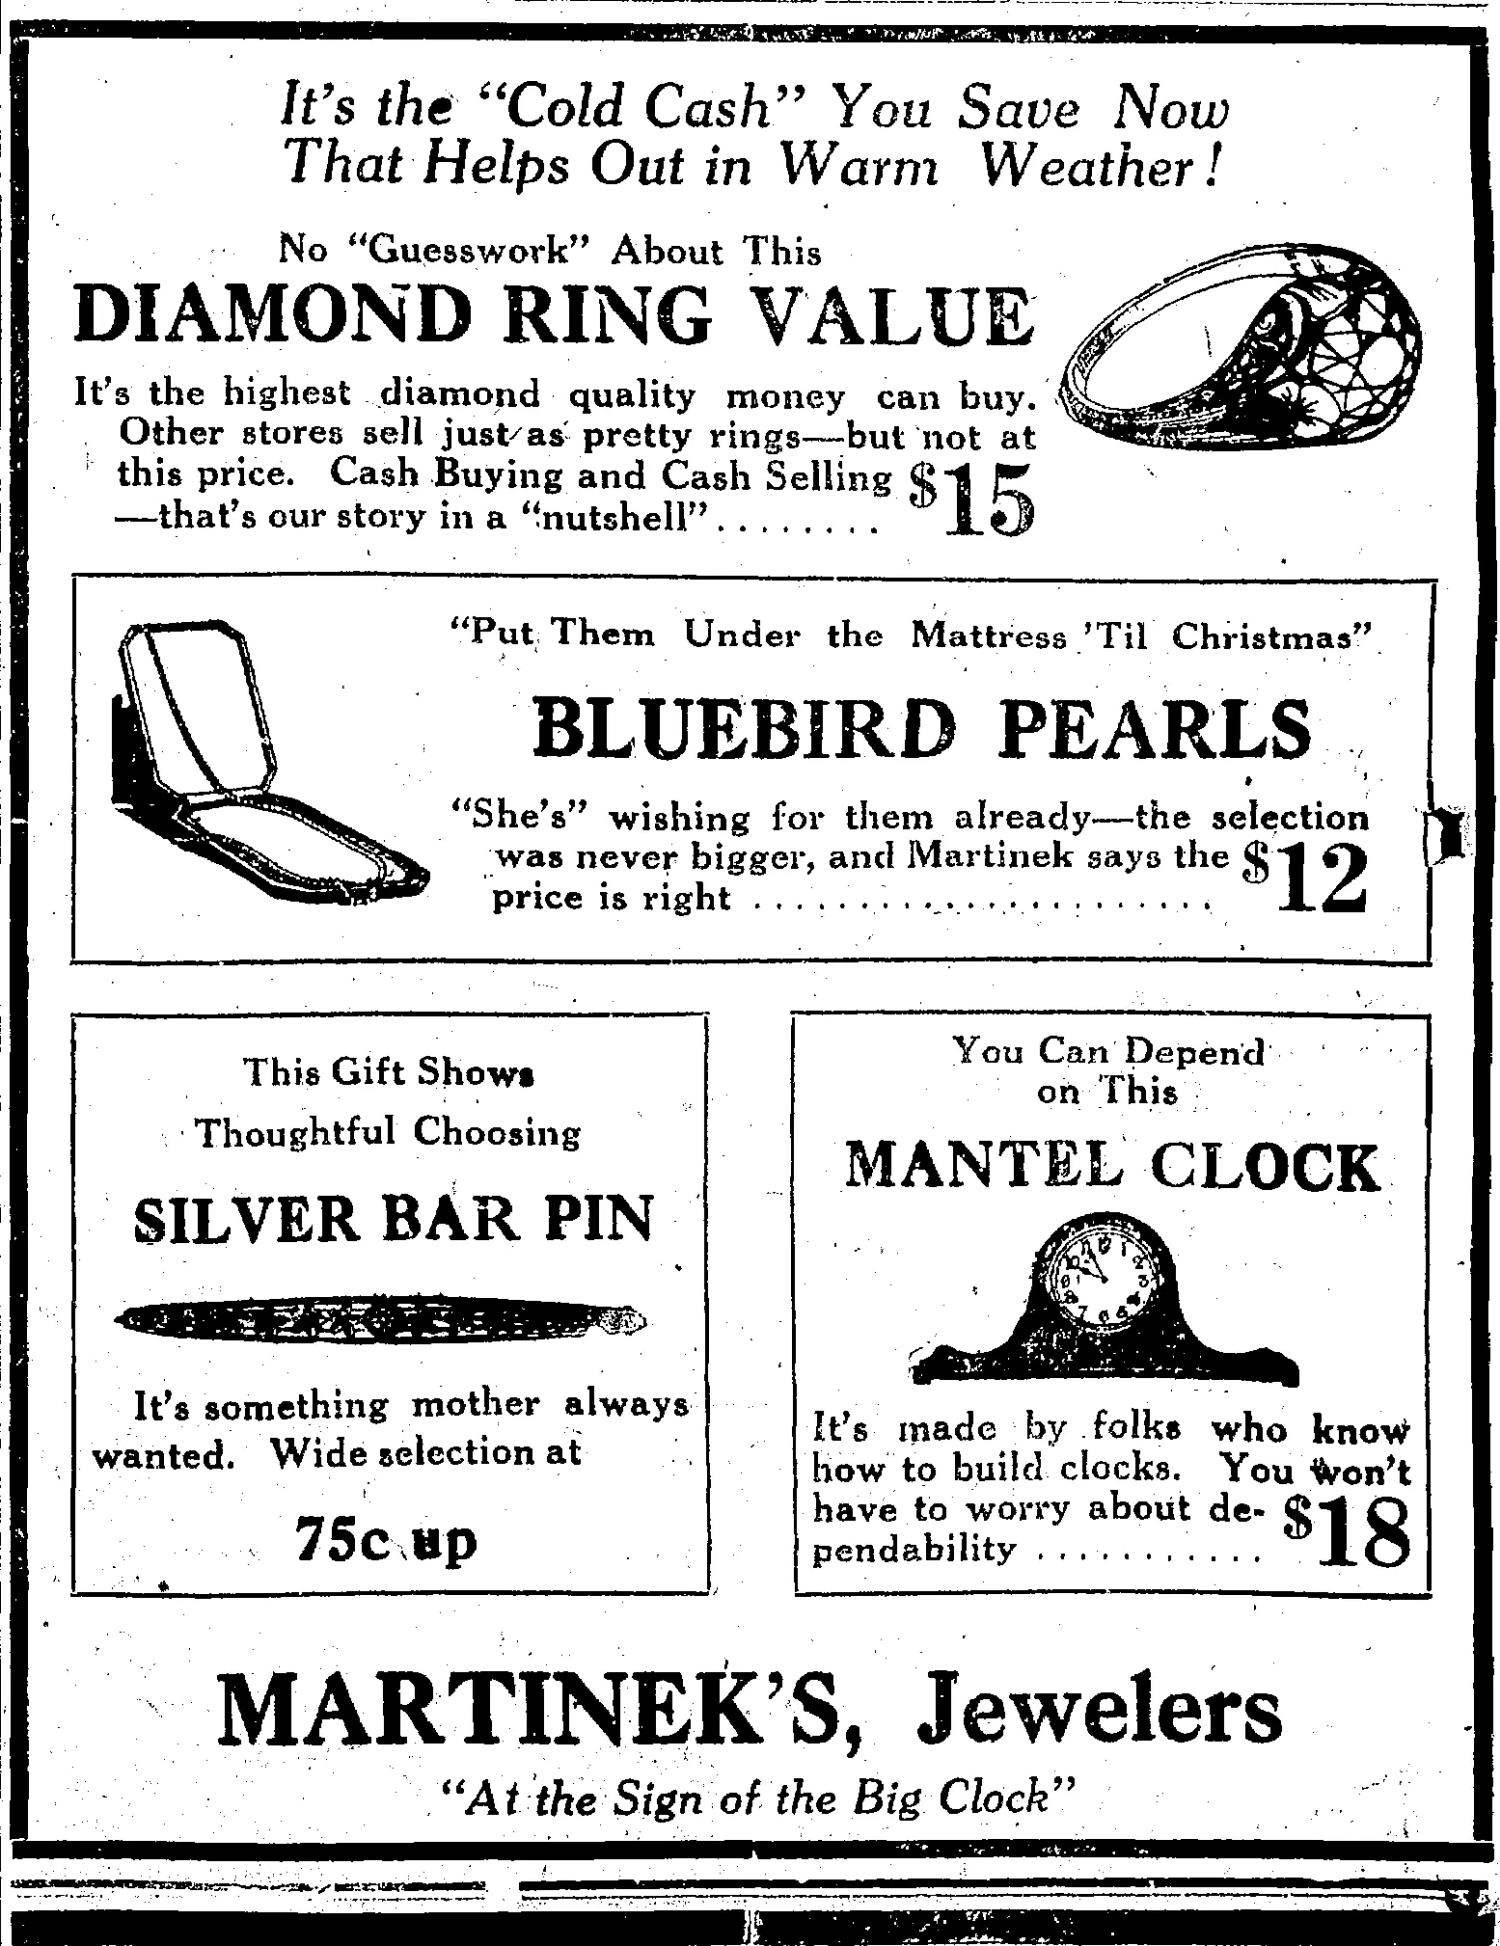 Martinek’s Jewelers ad from 1924